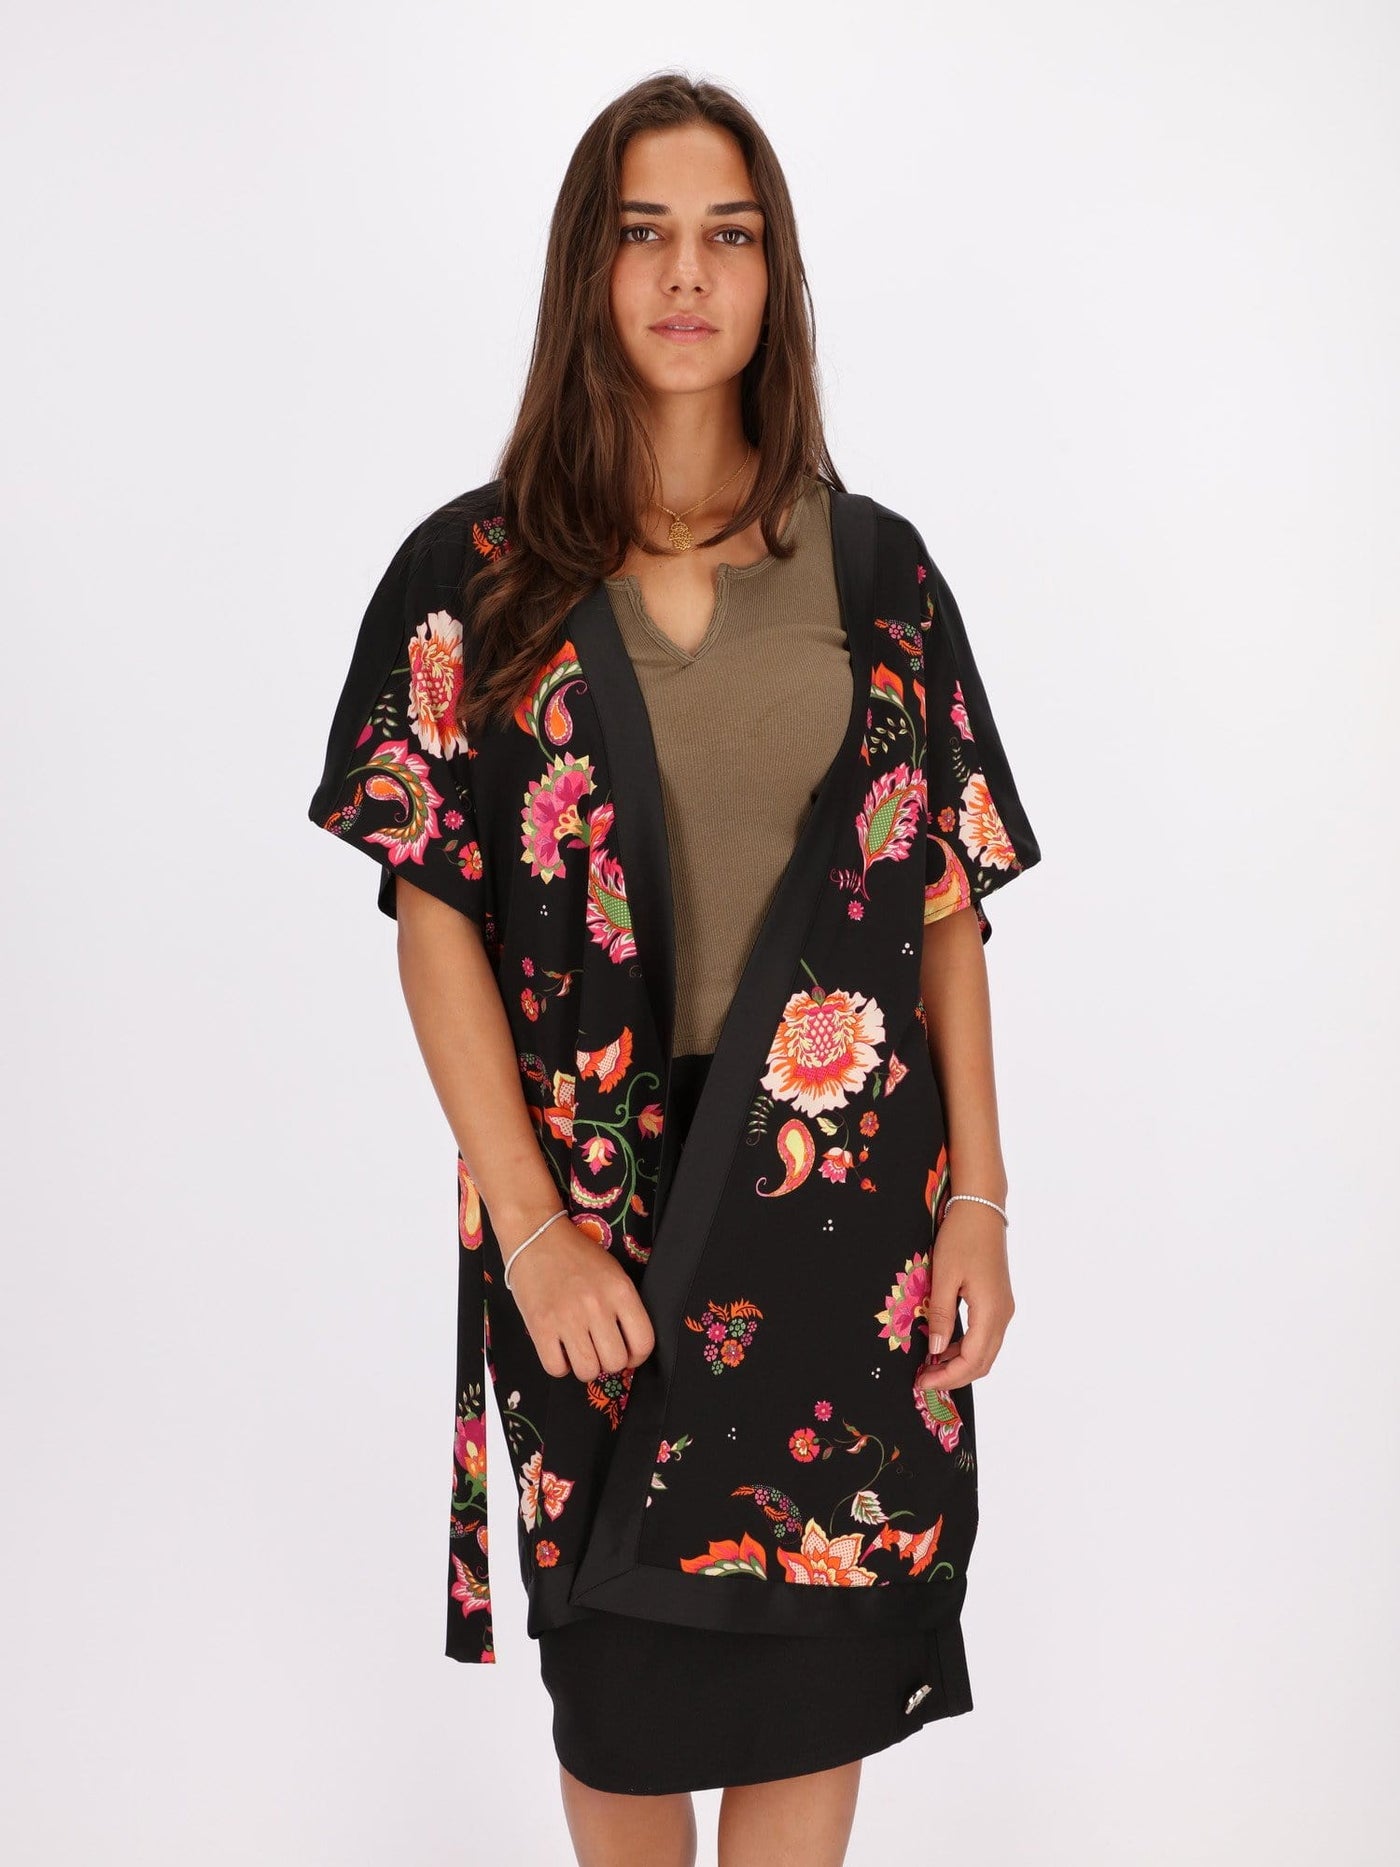 OR Jackets & Cardigans Floral Kimono with Butterfly Sleeve